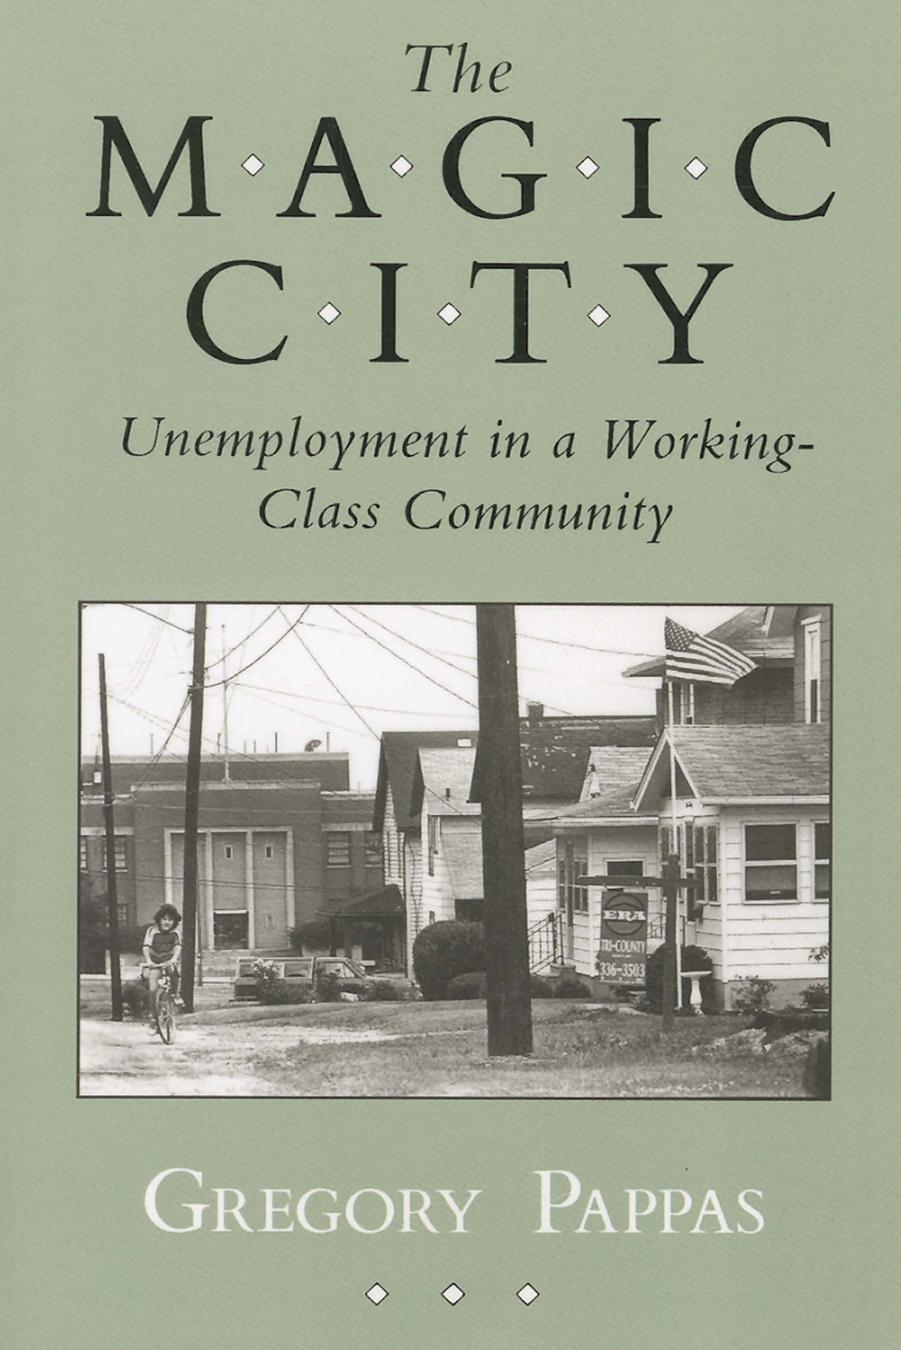 The Magic City: Unemployment in a Working-Class Community by Gregory Pappas